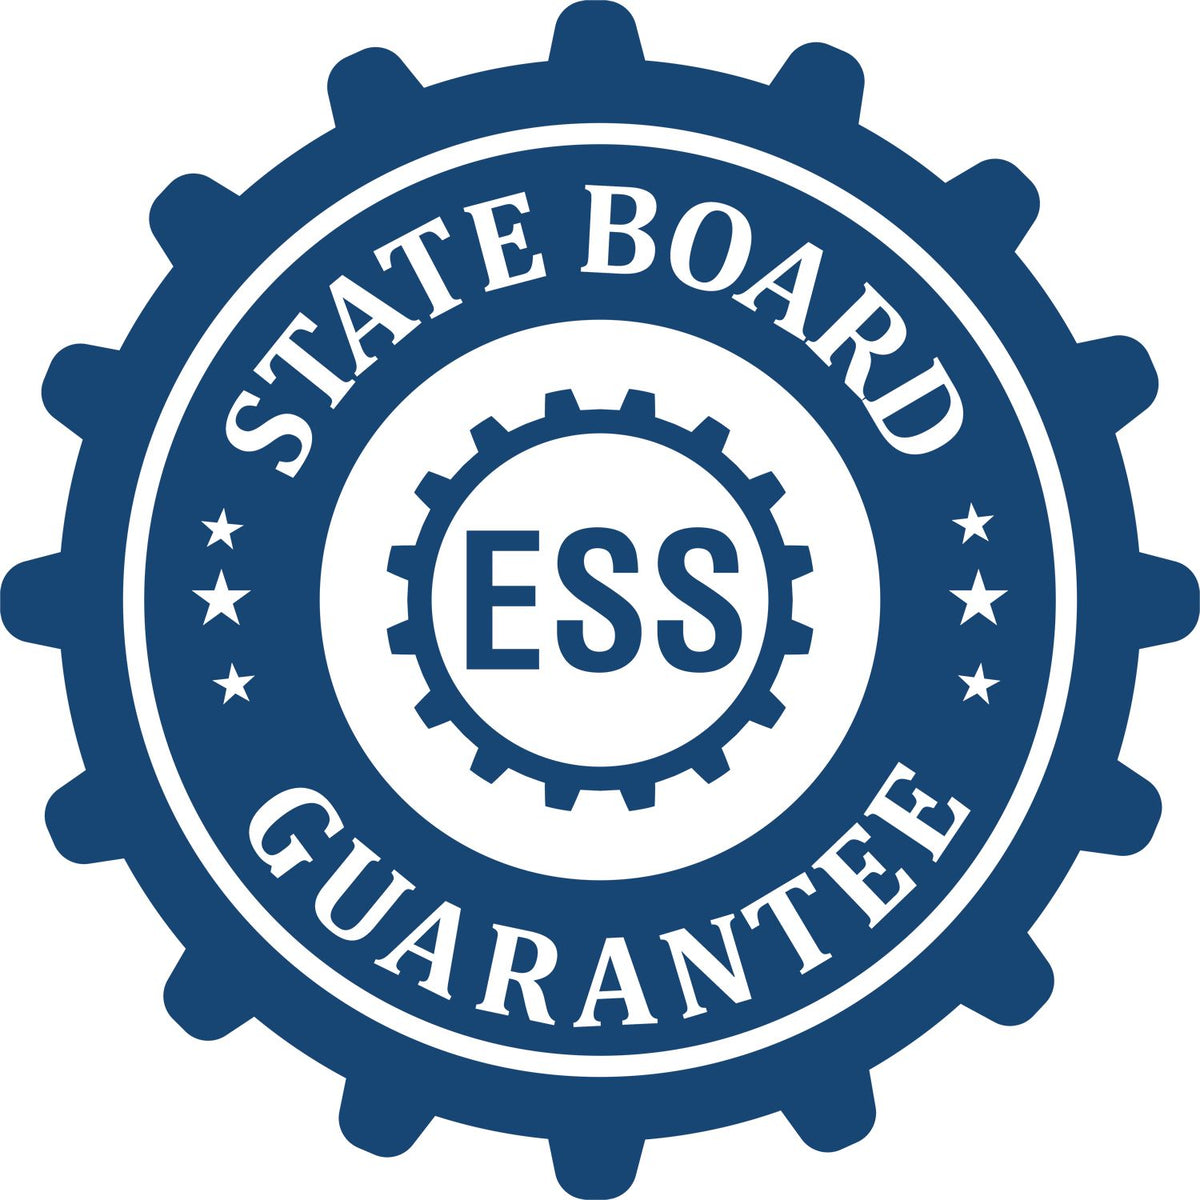 An emblem in a gear shape illustrating a state board guarantee for the Missouri Landscape Architectural Seal Stamp product.